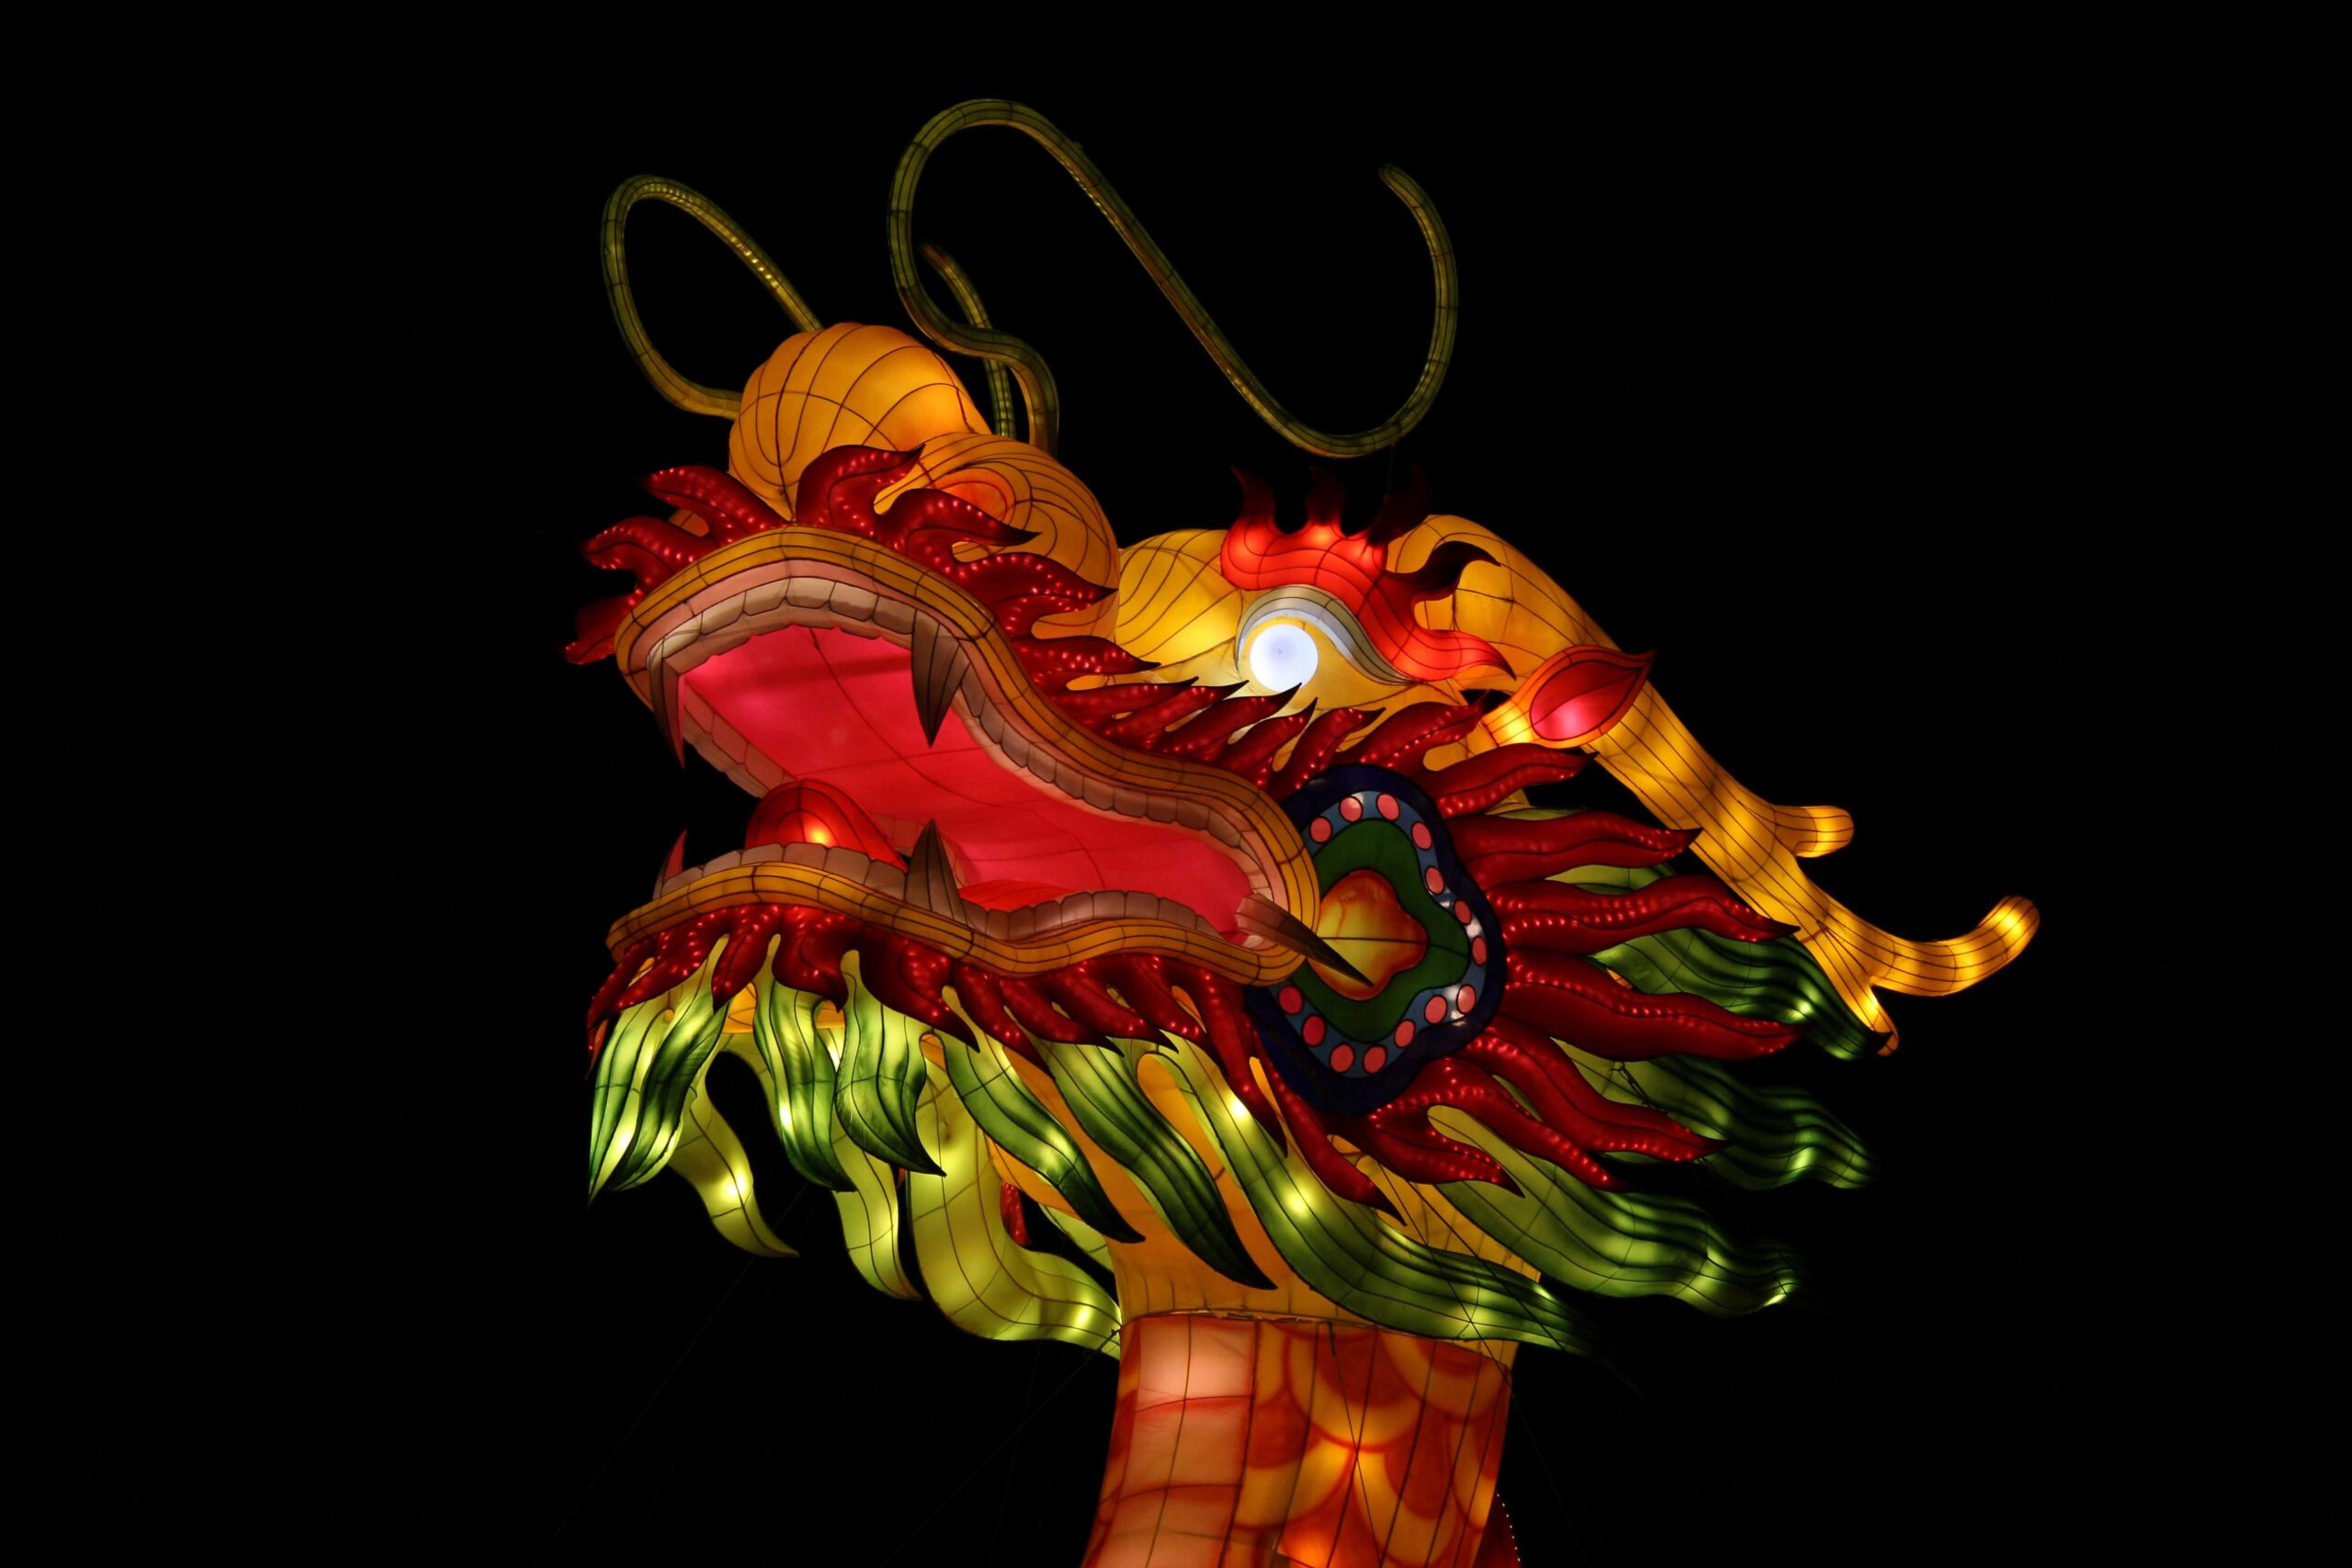 This year we welcome the Year of the Wood Dragon